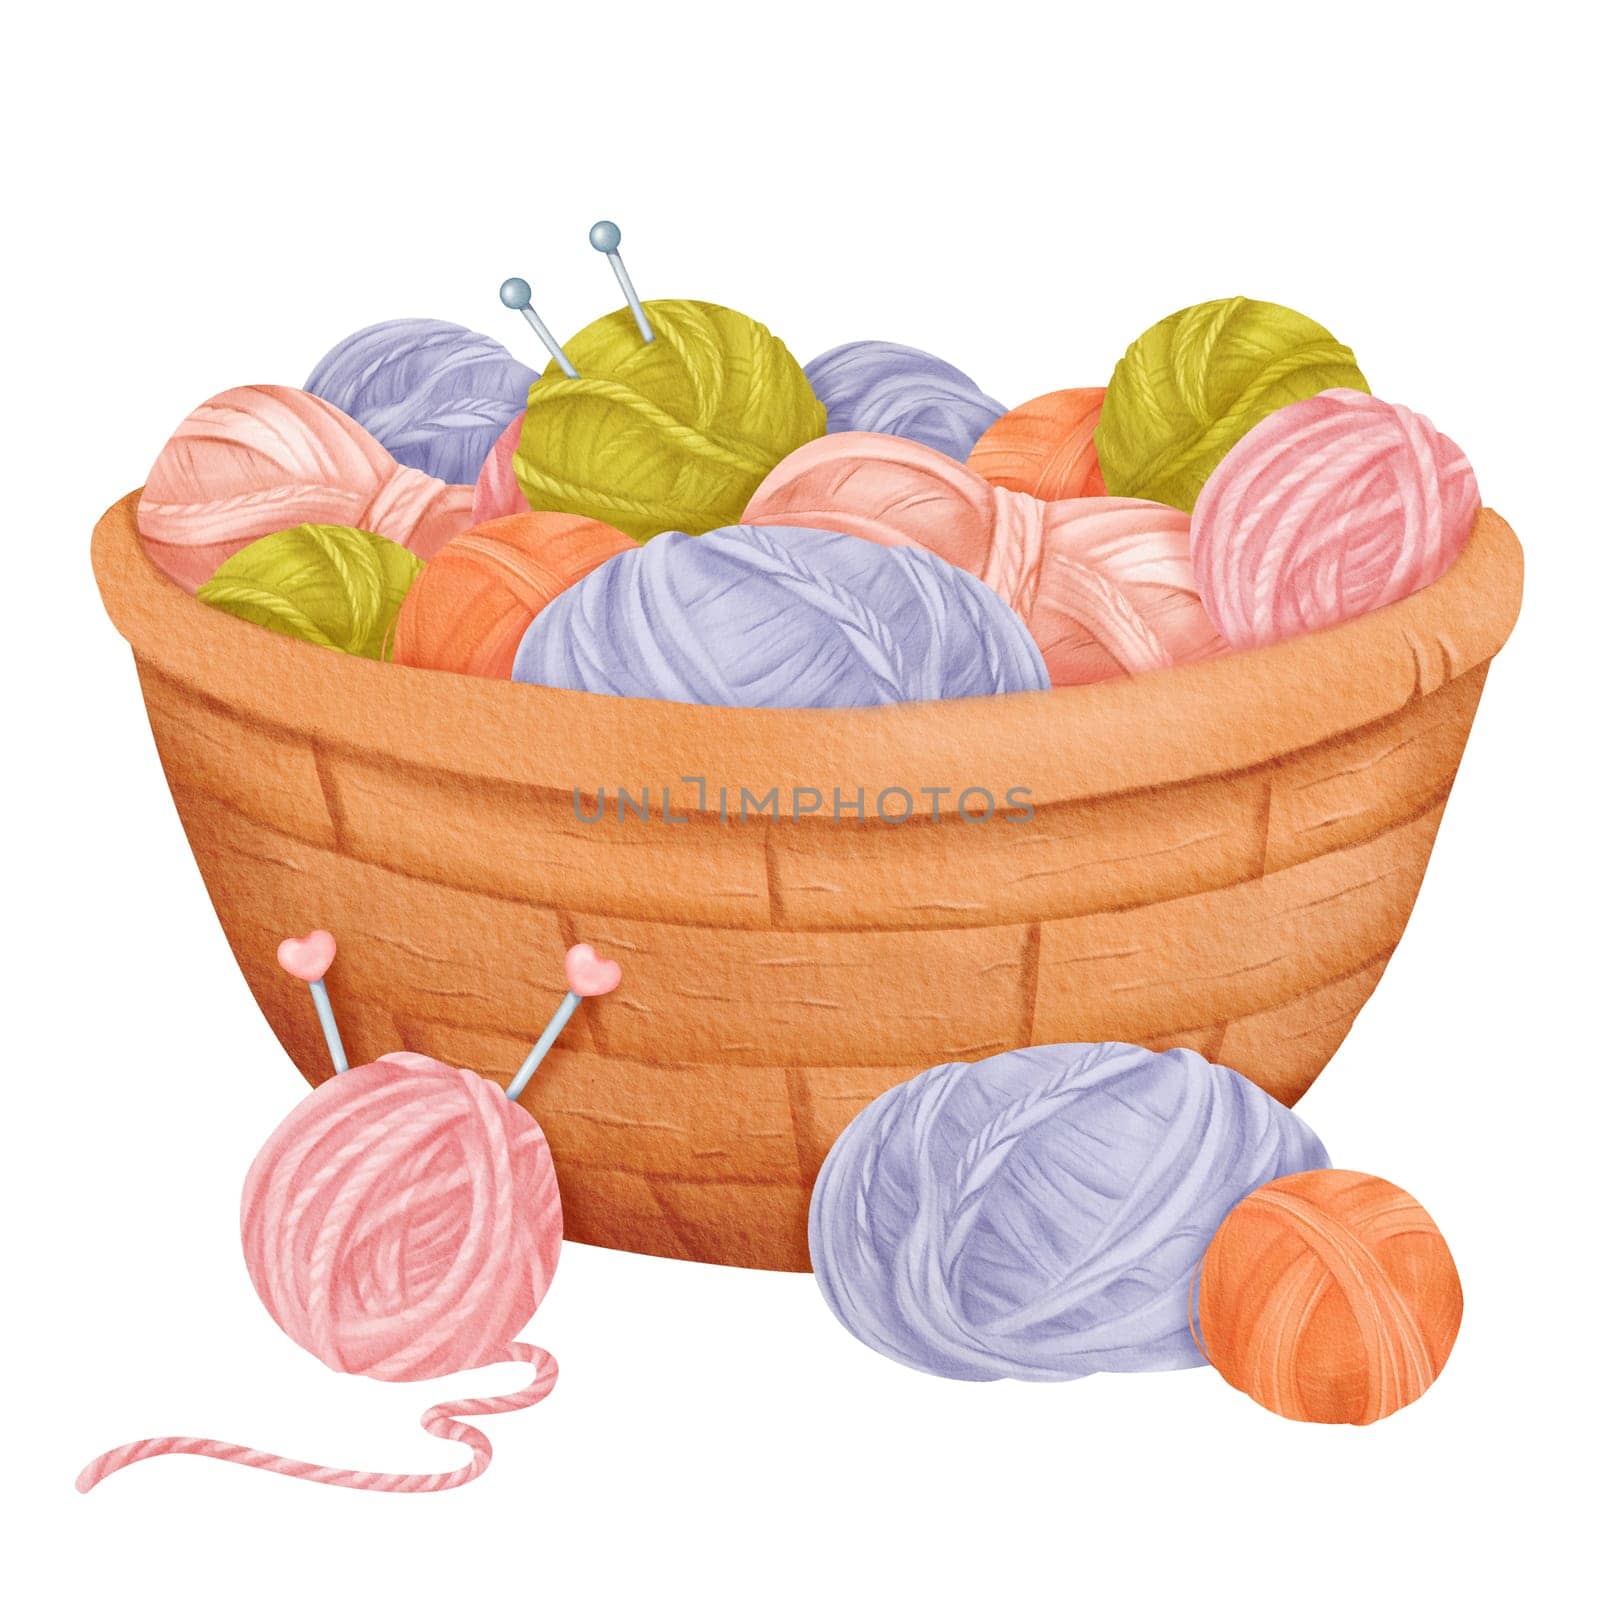 A cozy setup featuring a woven basket filled with assorted yarn balls and knitting needles. Perfect for crafting enthusiasts, knitting tutorials, or DIY-themed designs. Watercolor illustration by Art_Mari_Ka